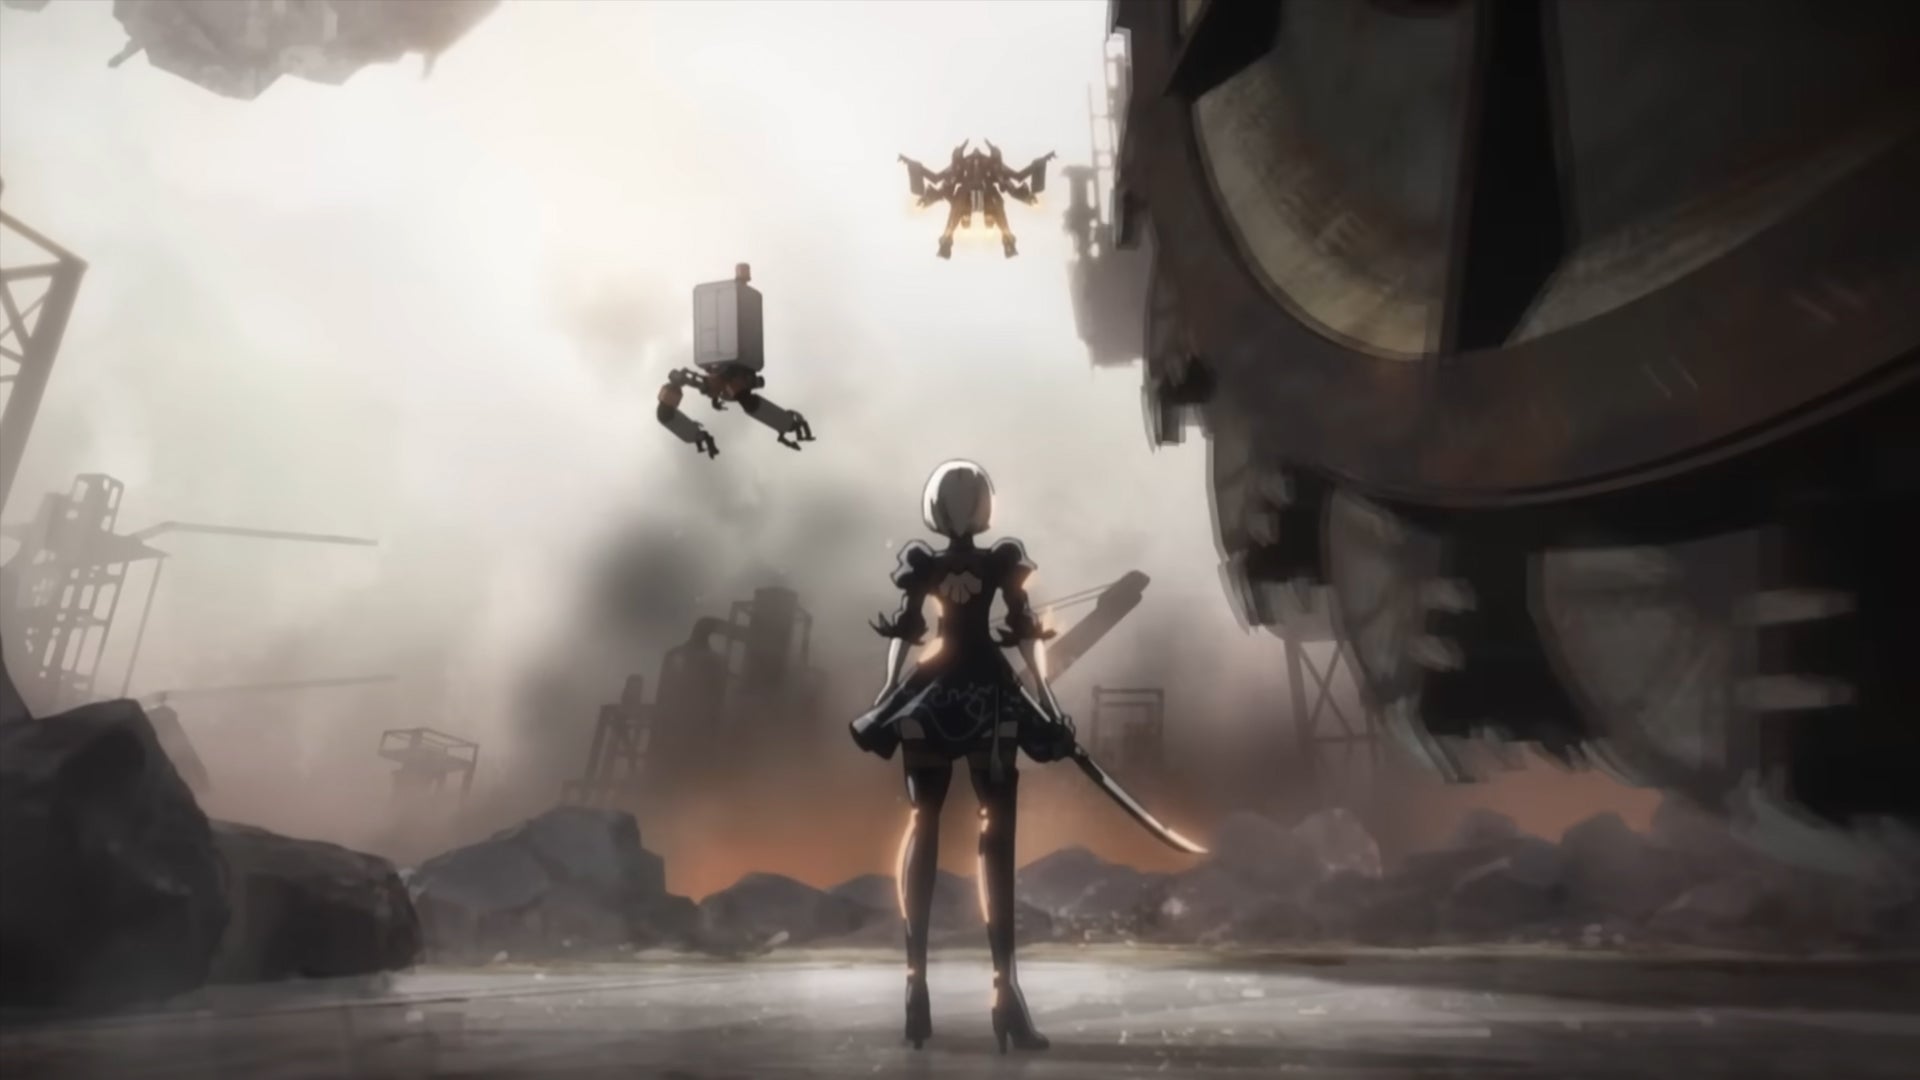 Here's why Nier Automata Anime is Delayed and when can it possibly resume?